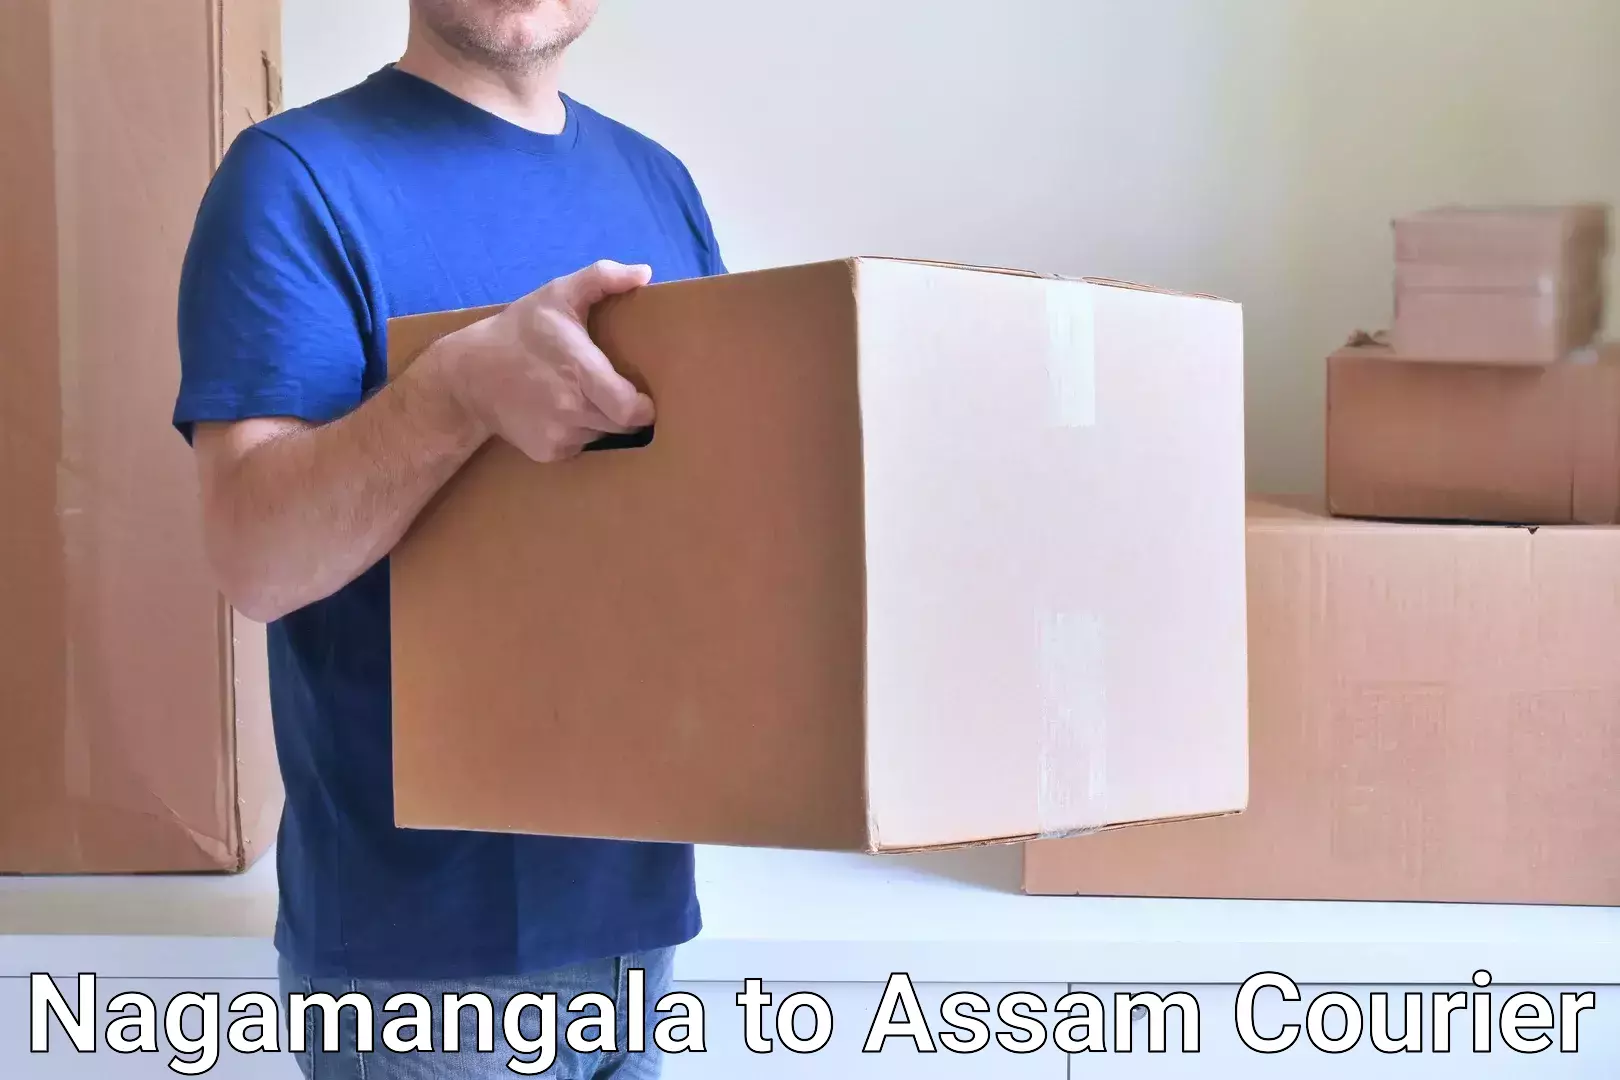 Package tracking in Nagamangala to Lala Assam